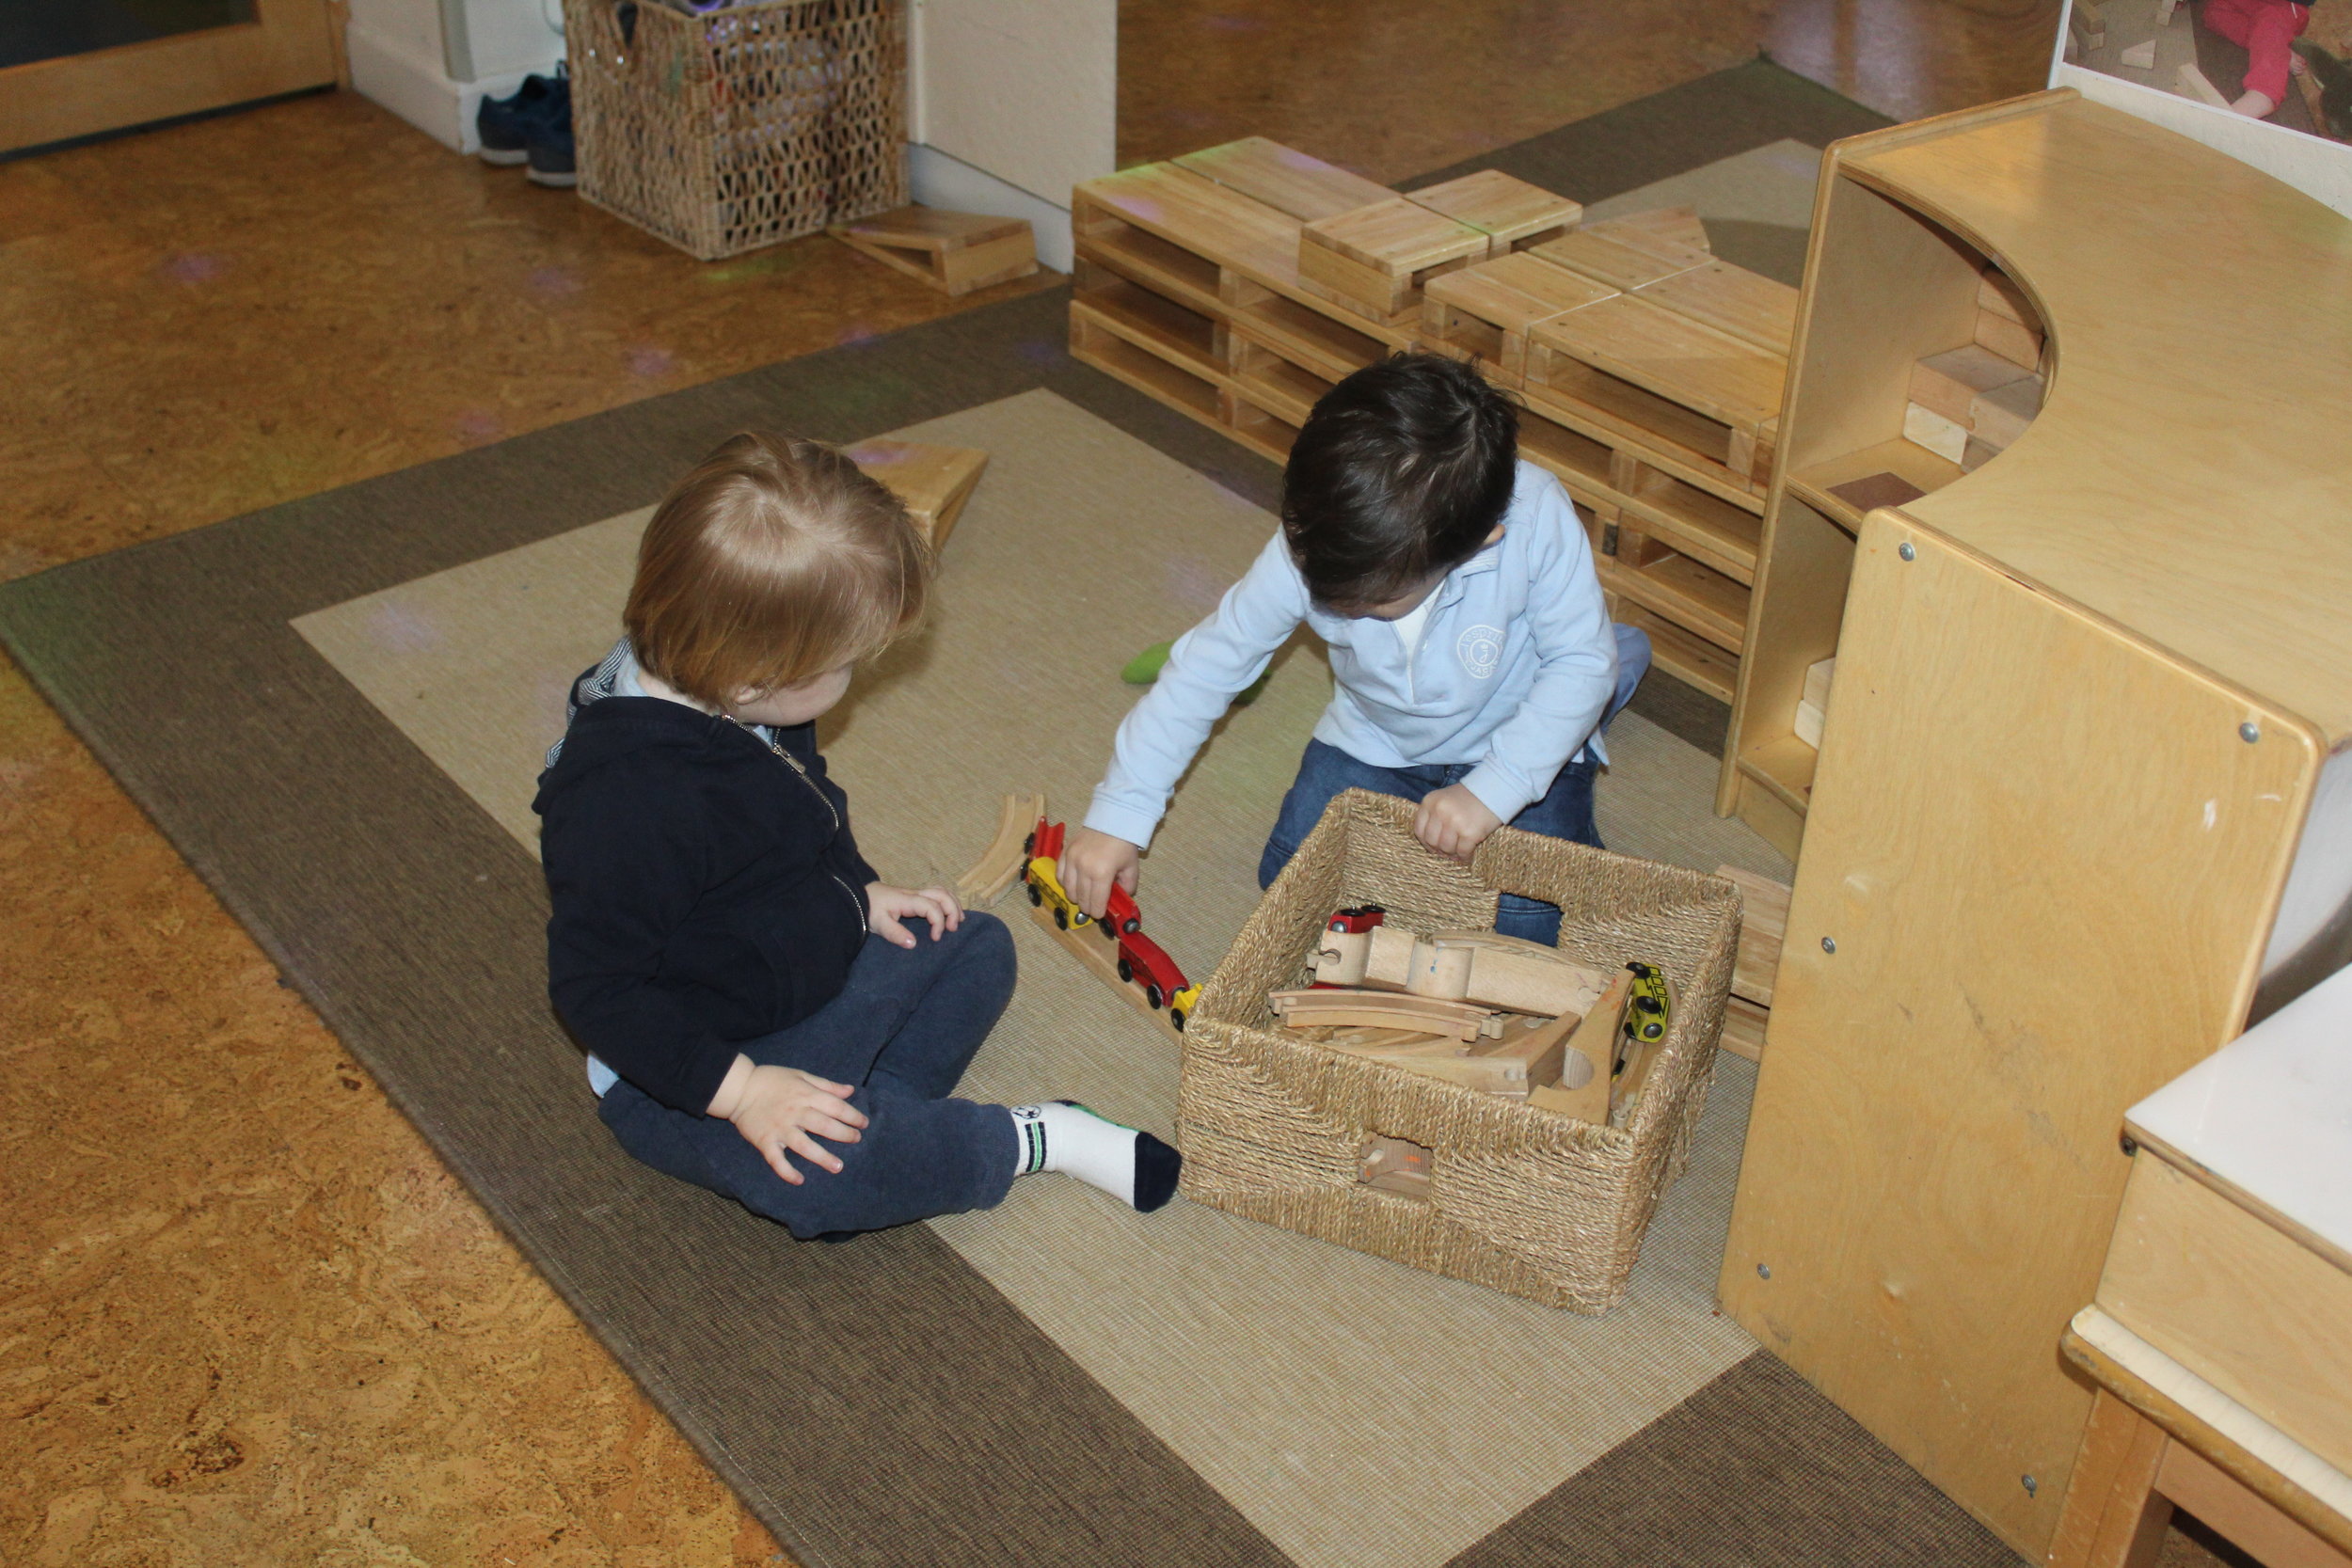  Children are learning to take turns, share toys and engage in play. 